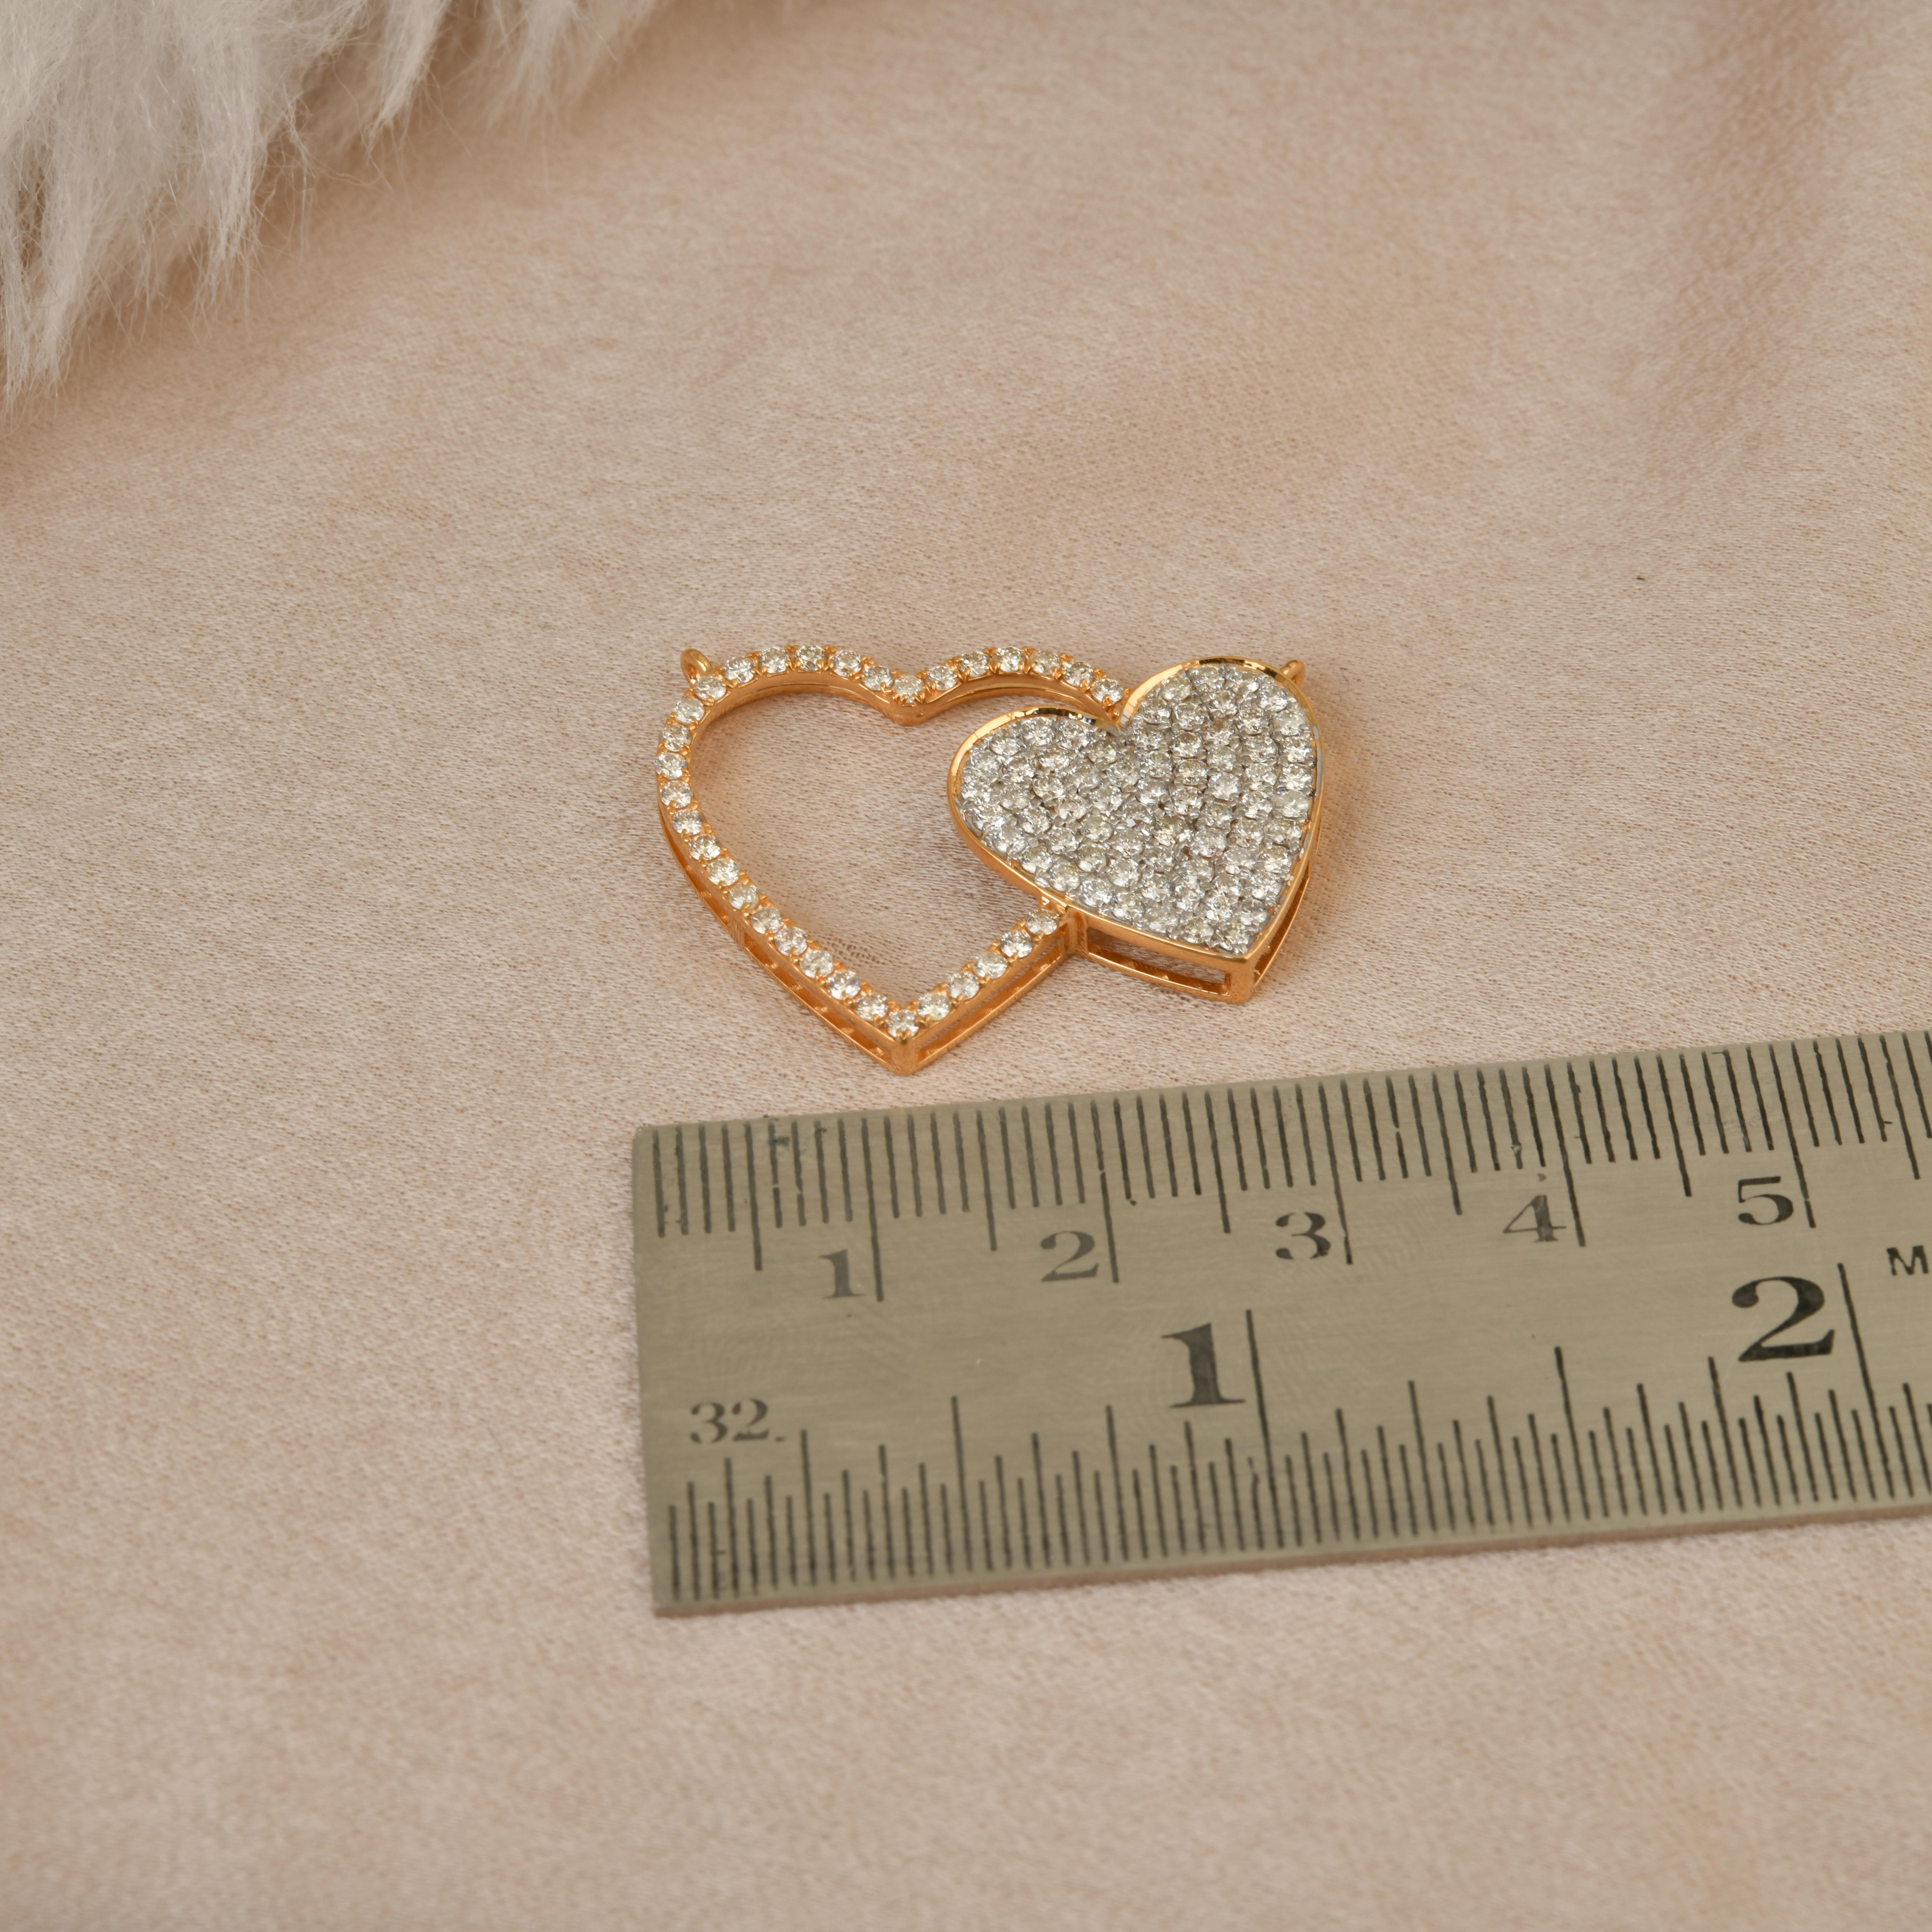 Round Cut 1.50 Carat Diamond Pave Double Heart Charm Pendant Solid 14k Yellow Gold Jewelry For Sale